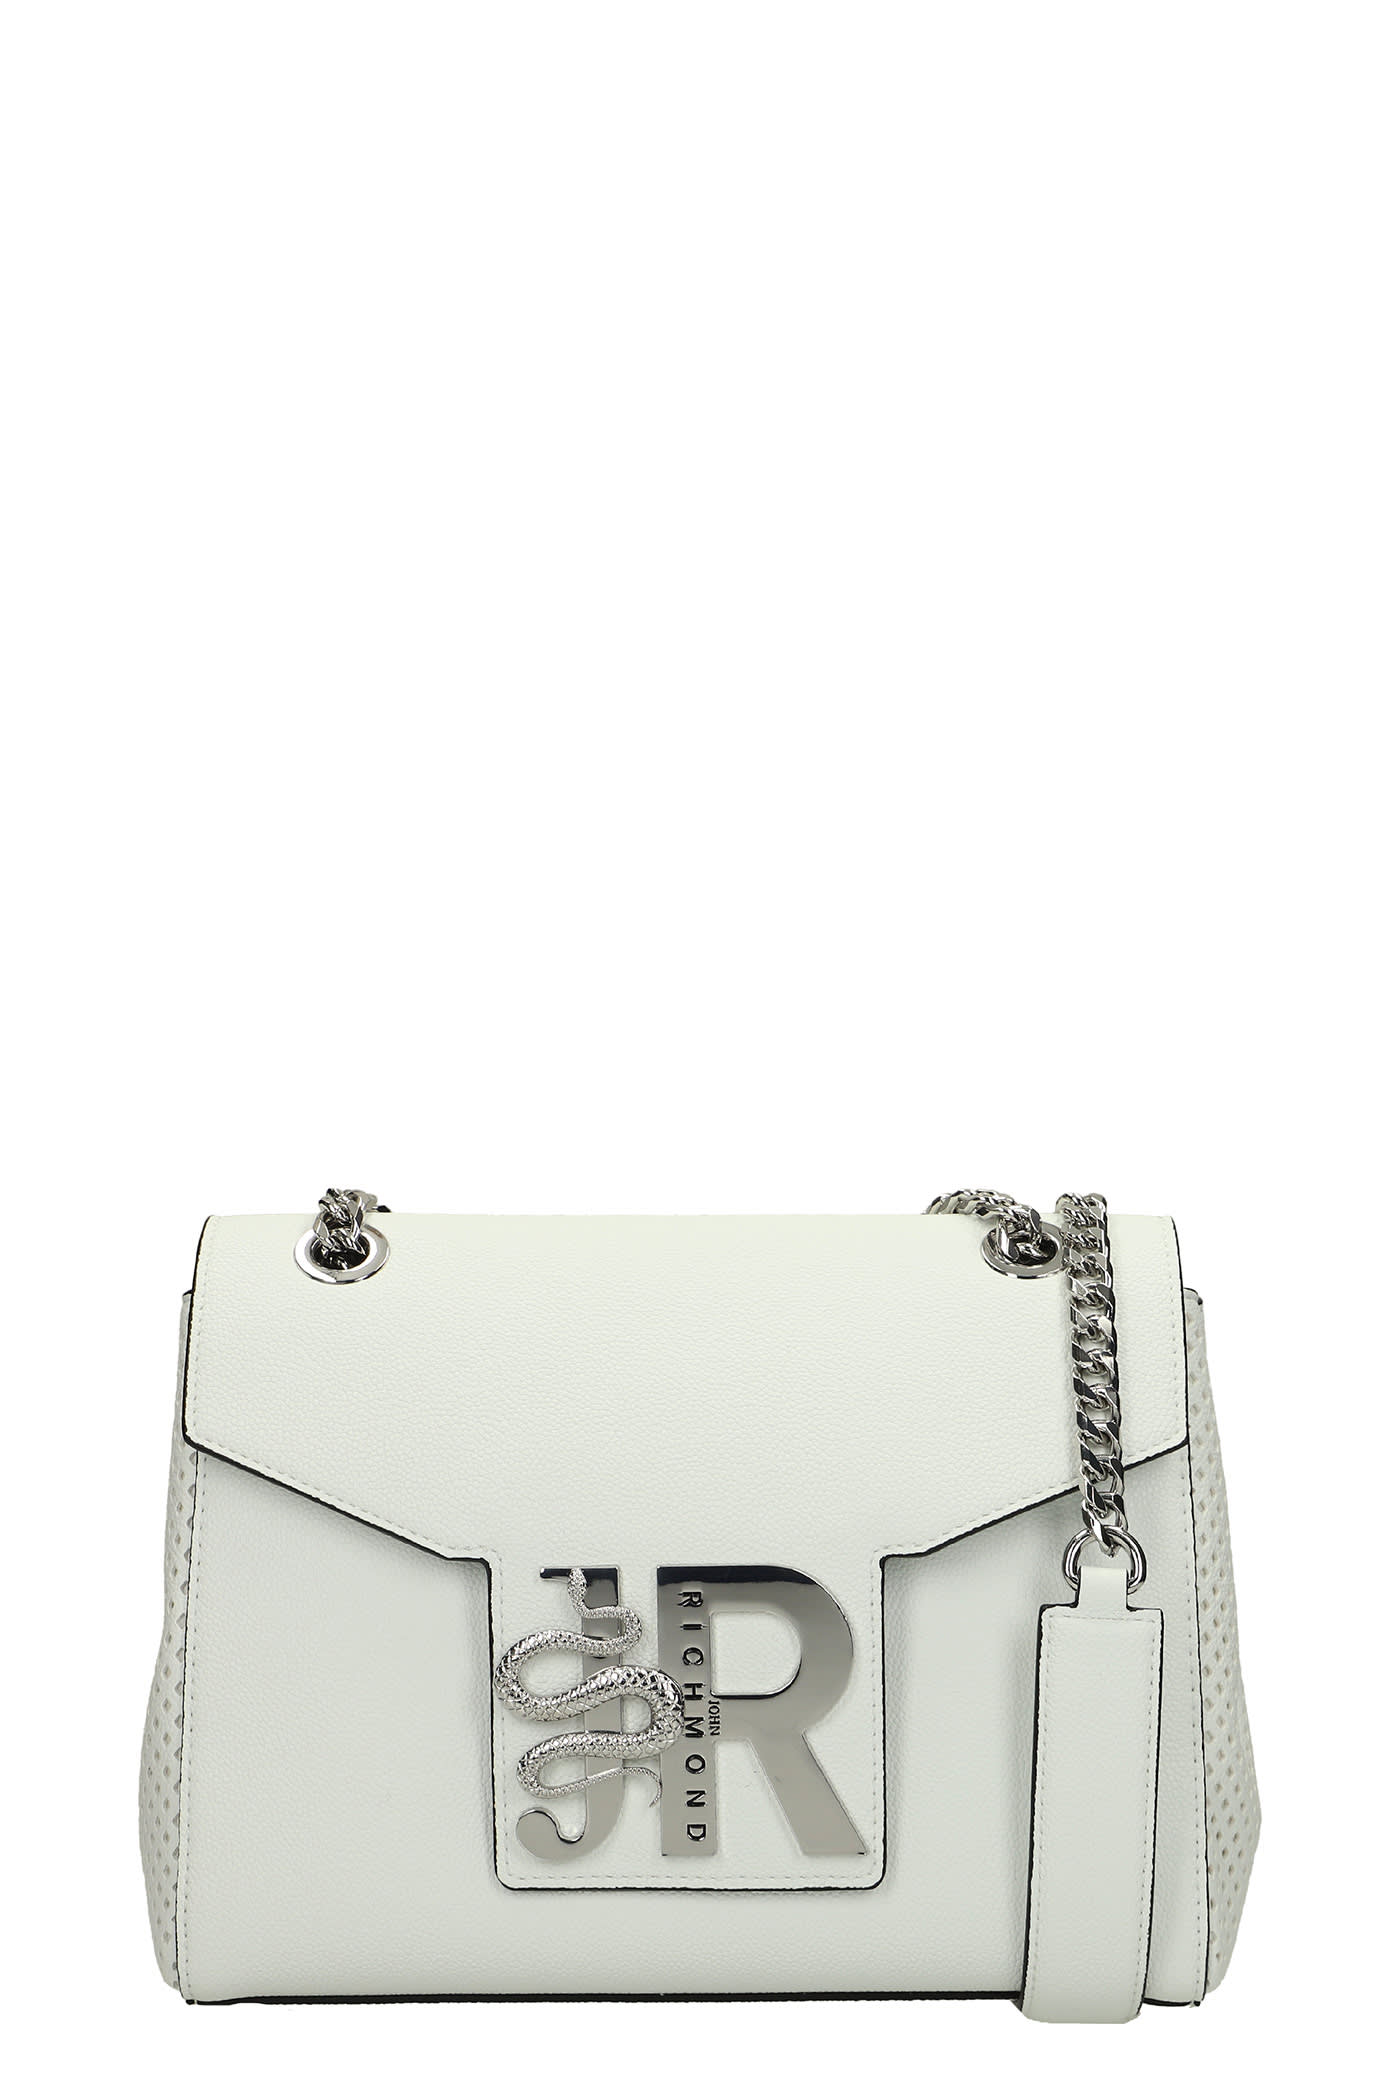 John Richmond Madio Shoulder Bag In White Faux Leather